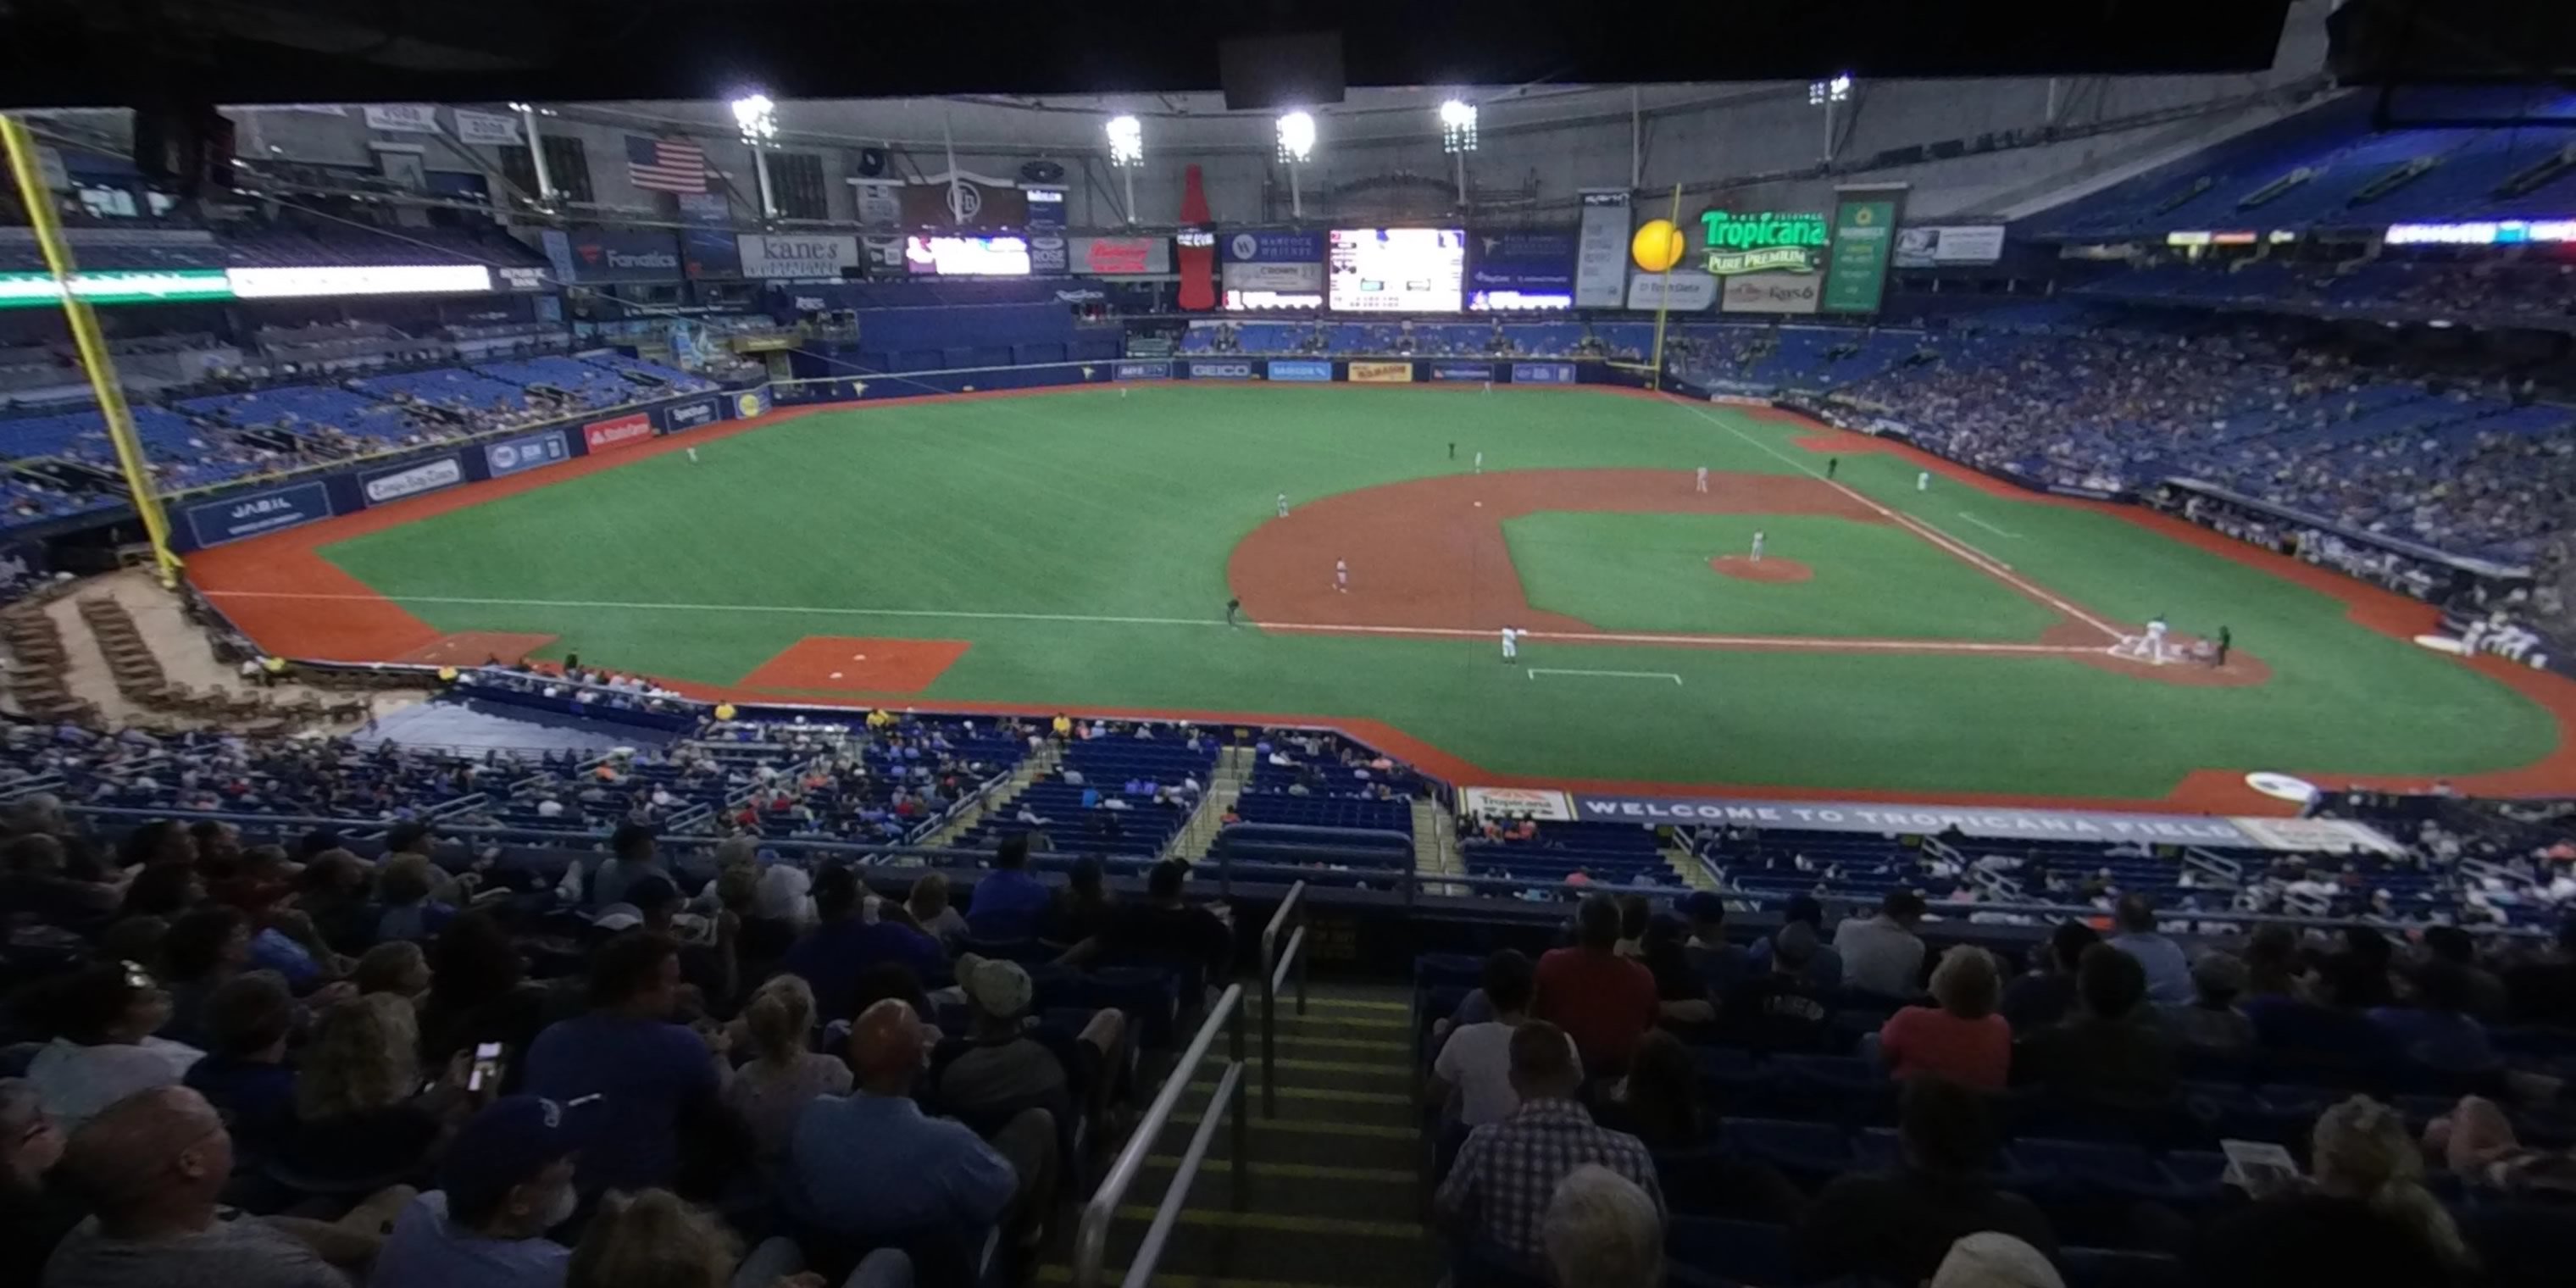 section 213 panoramic seat view  for baseball - tropicana field